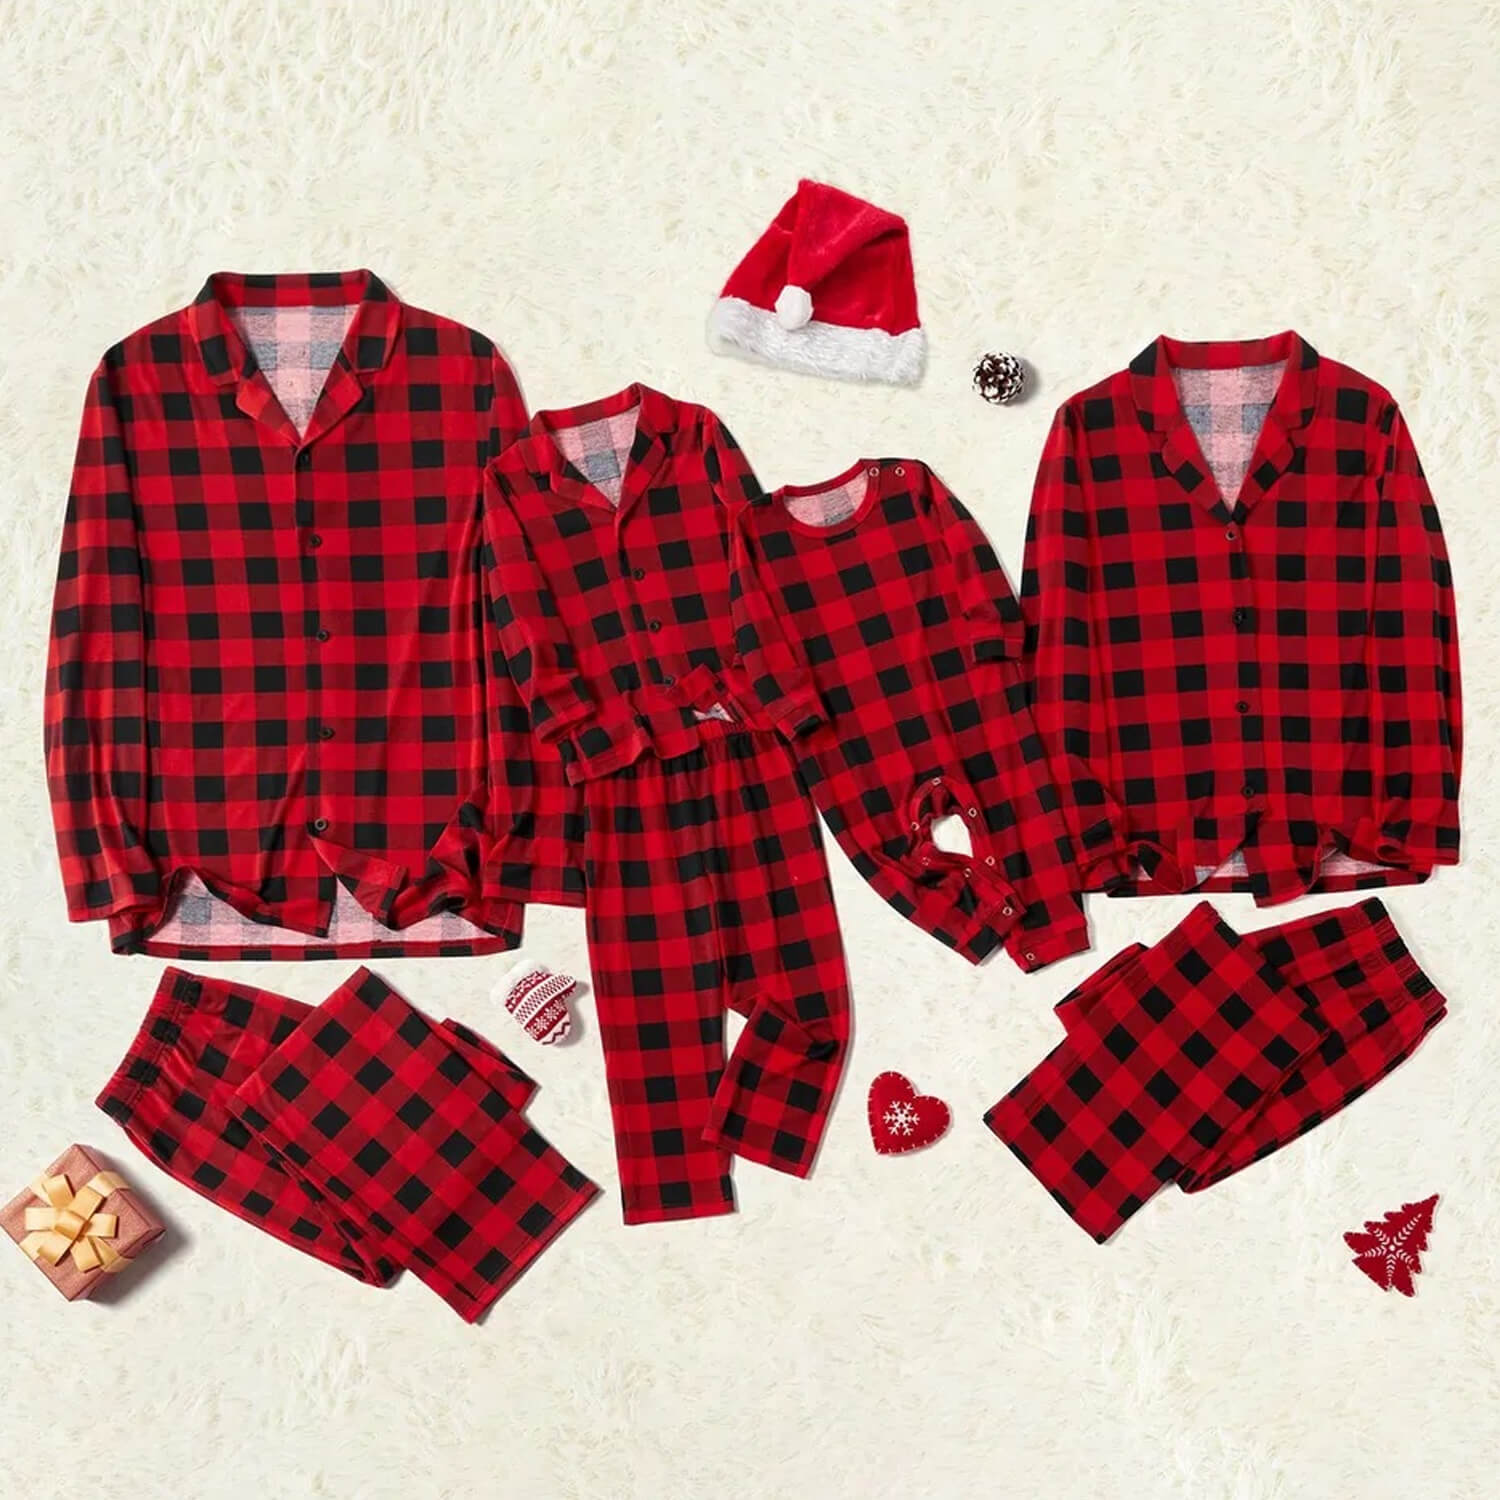 Kids Adult Christmas Costume New Year Long Sleeve Family Matching Outfits Sleepwear